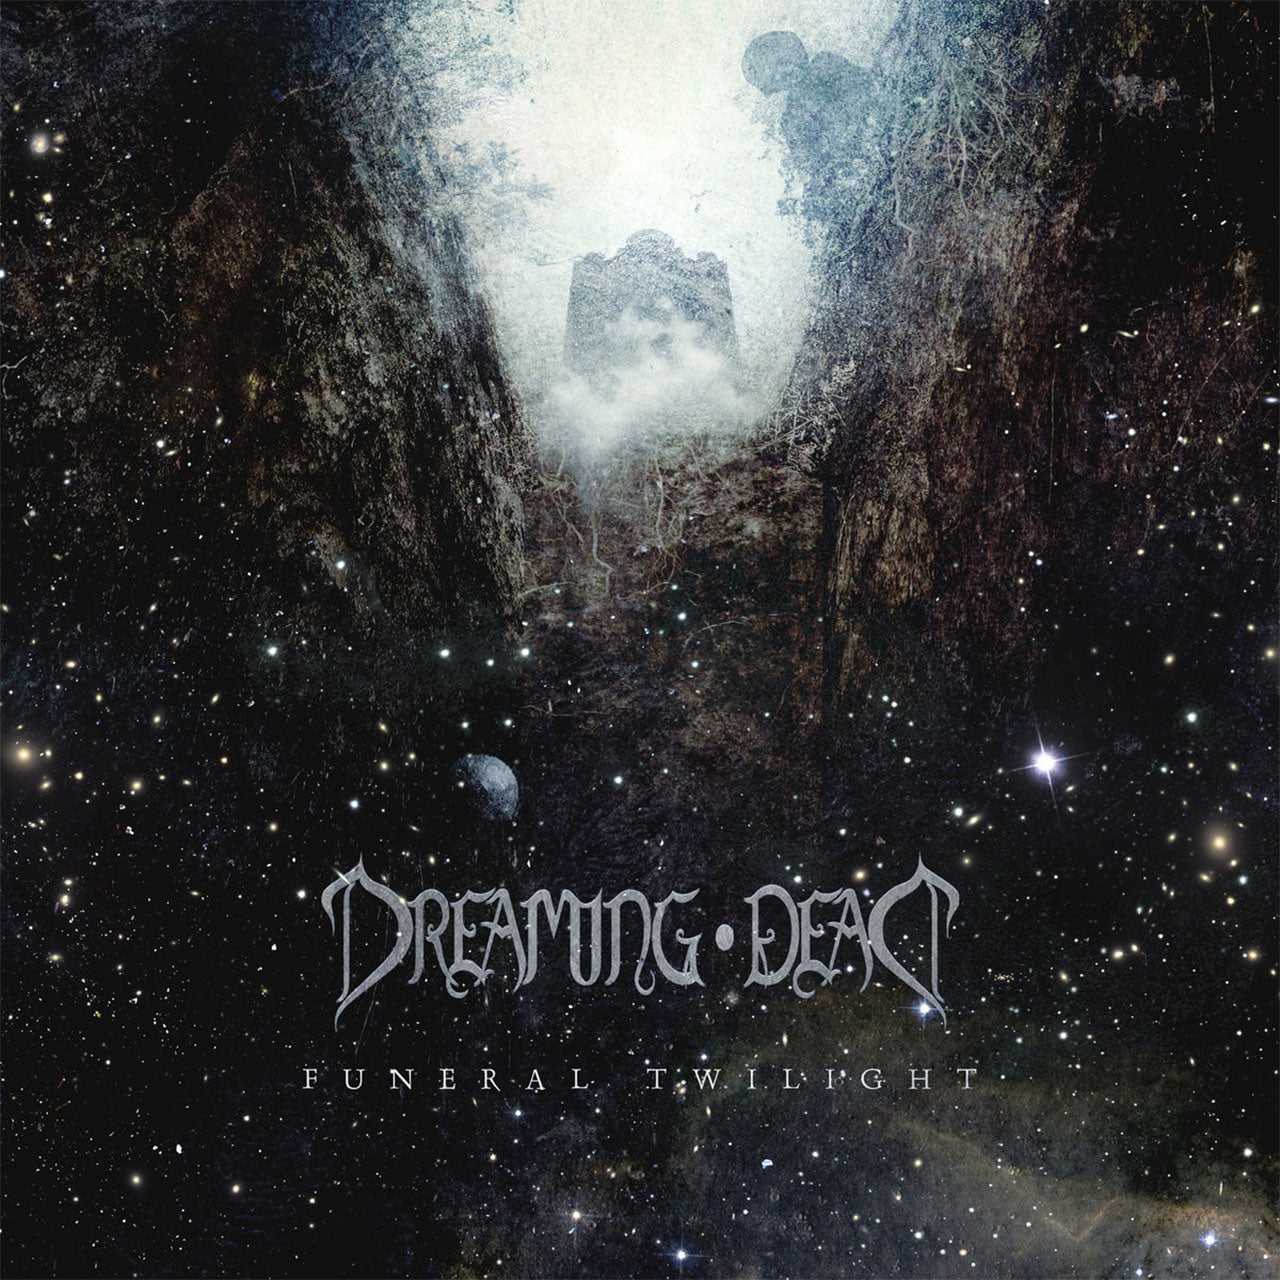 Dreaming Dead - Funeral Twilight (CD)